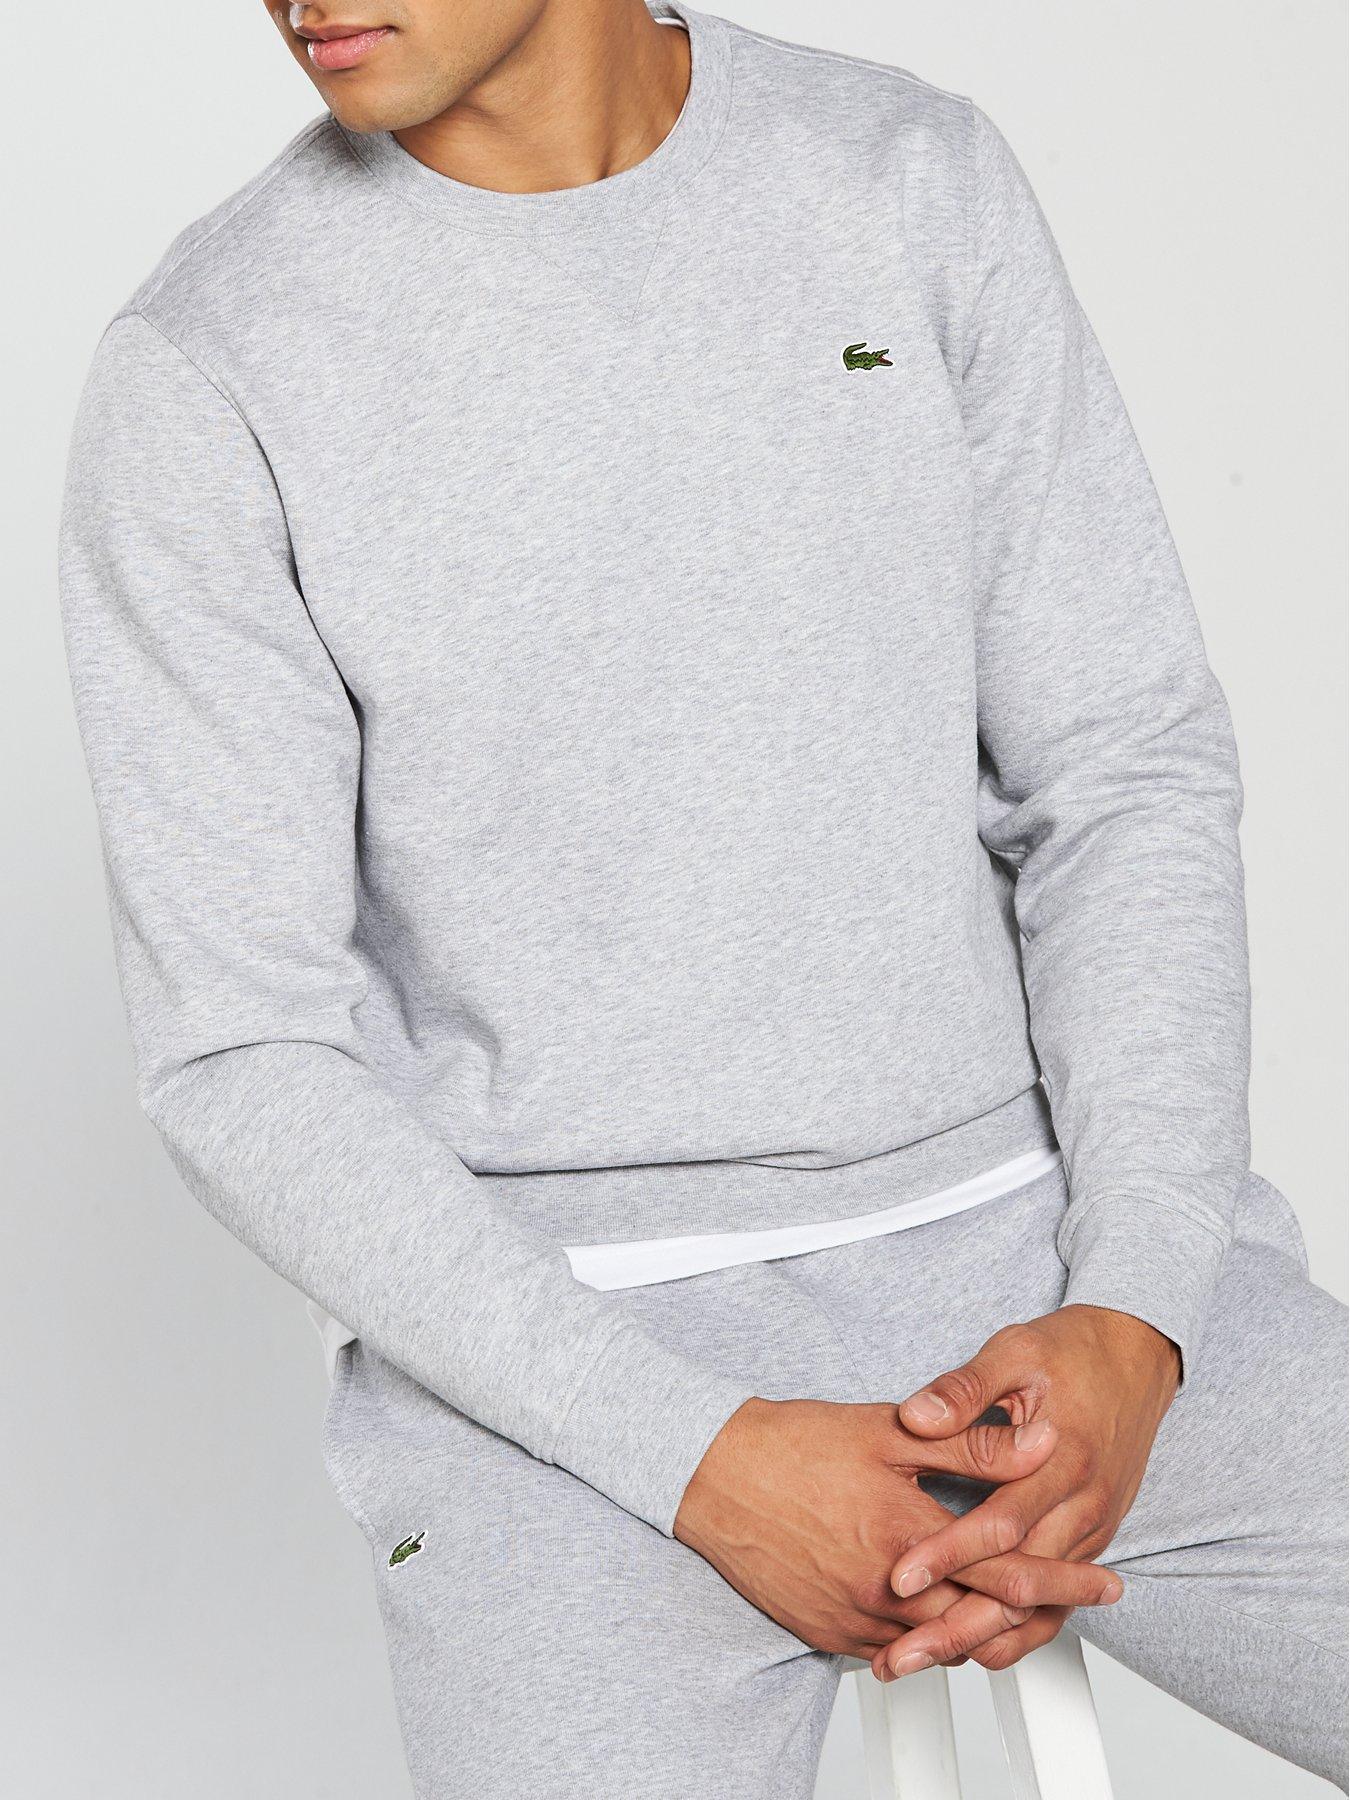 gray lacoste hoodie